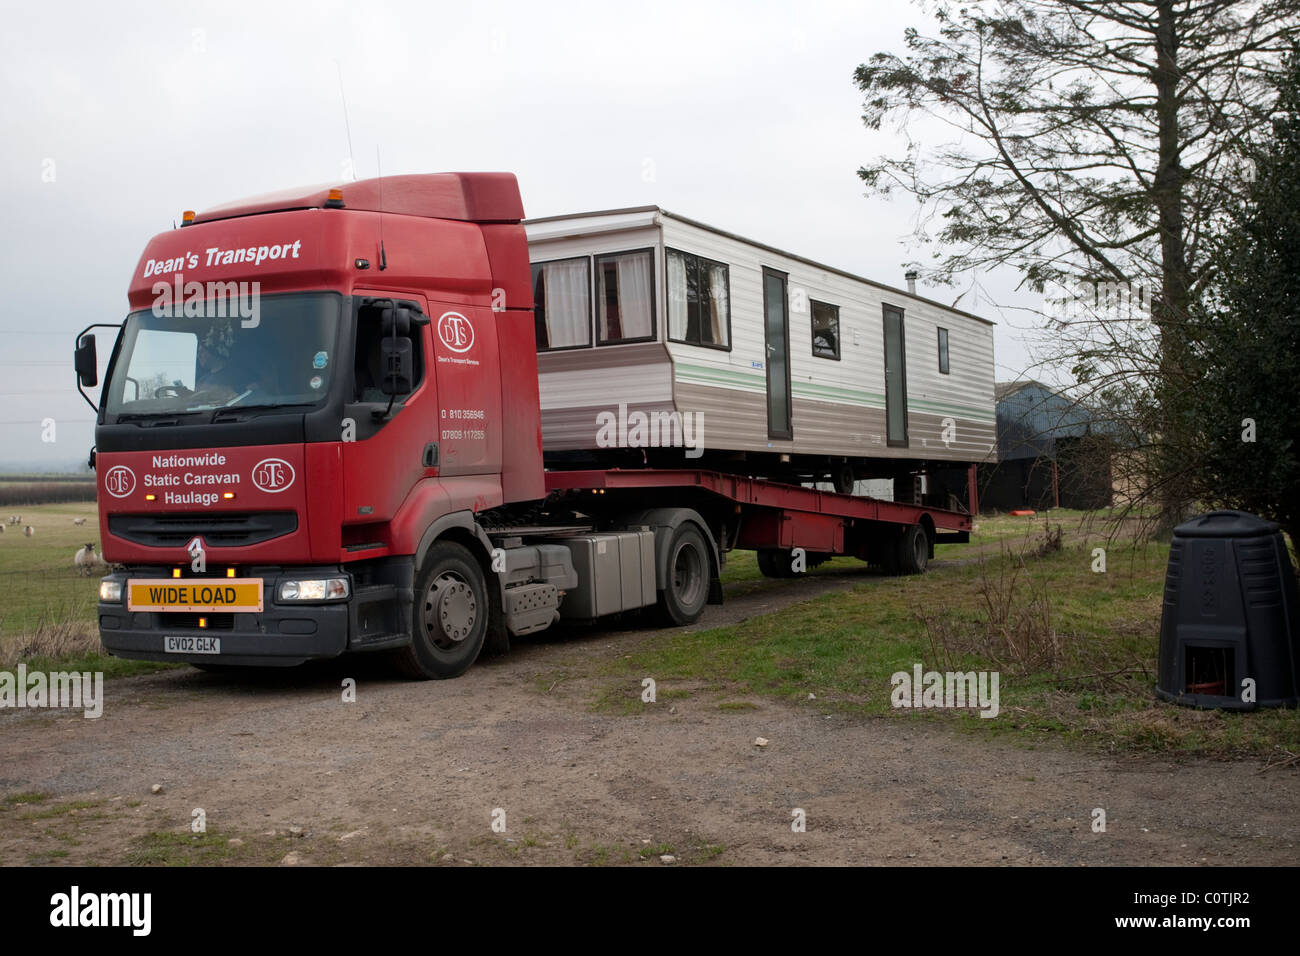 Large haulage lorry transporting 35ft mobile home to Colemans Hill Farm via Dean Transport 9 Feb 2011 Stock Photo